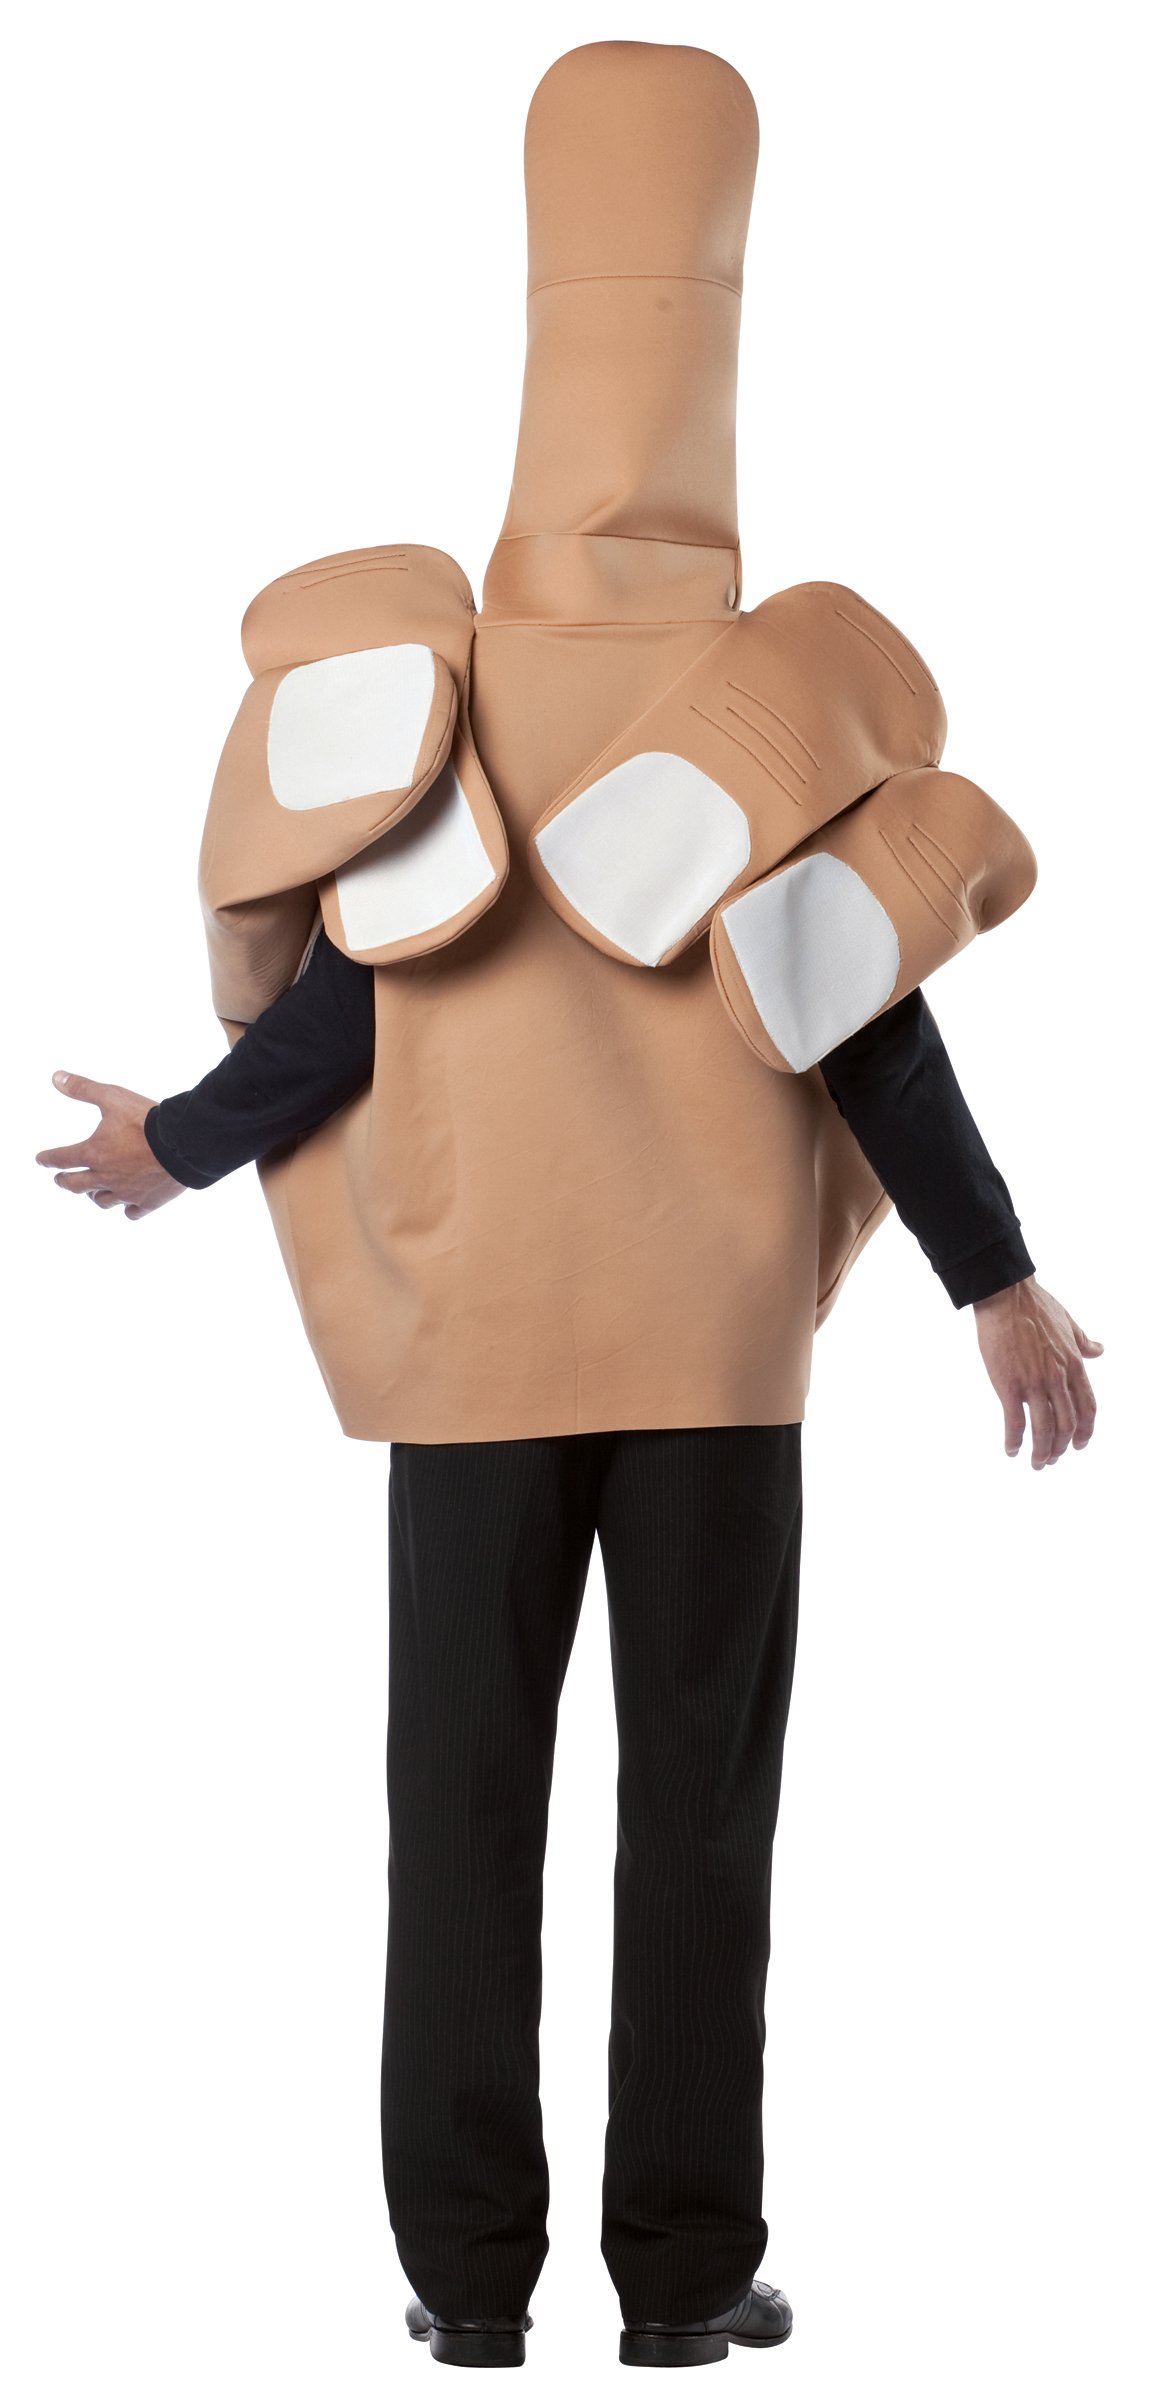 The Finger Adult Costume